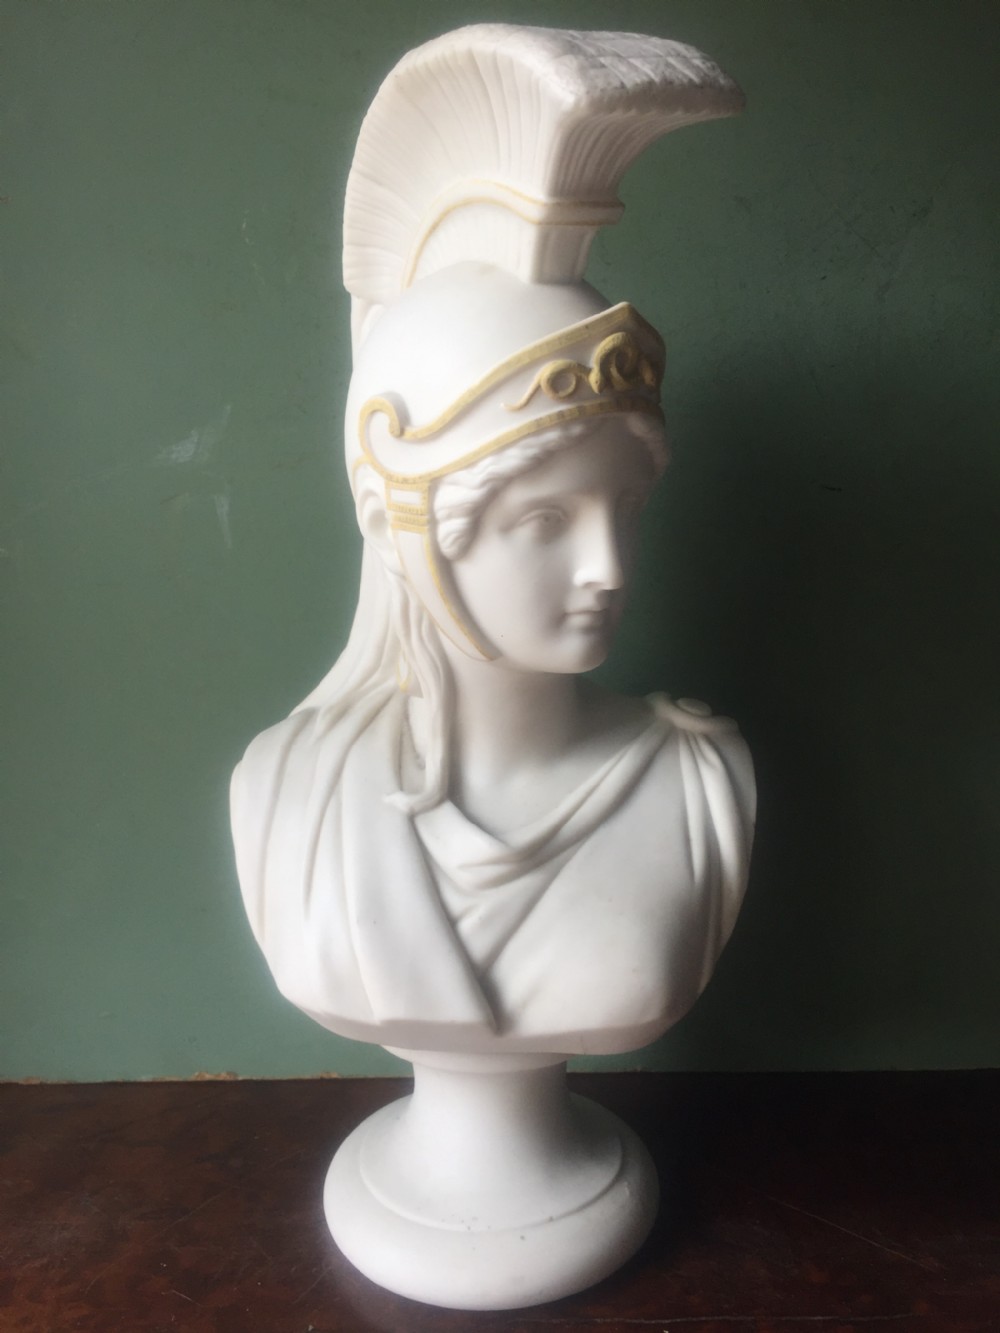 fine quality c19th parianware bust study of achilles hero of the trojan wars in greek mythology